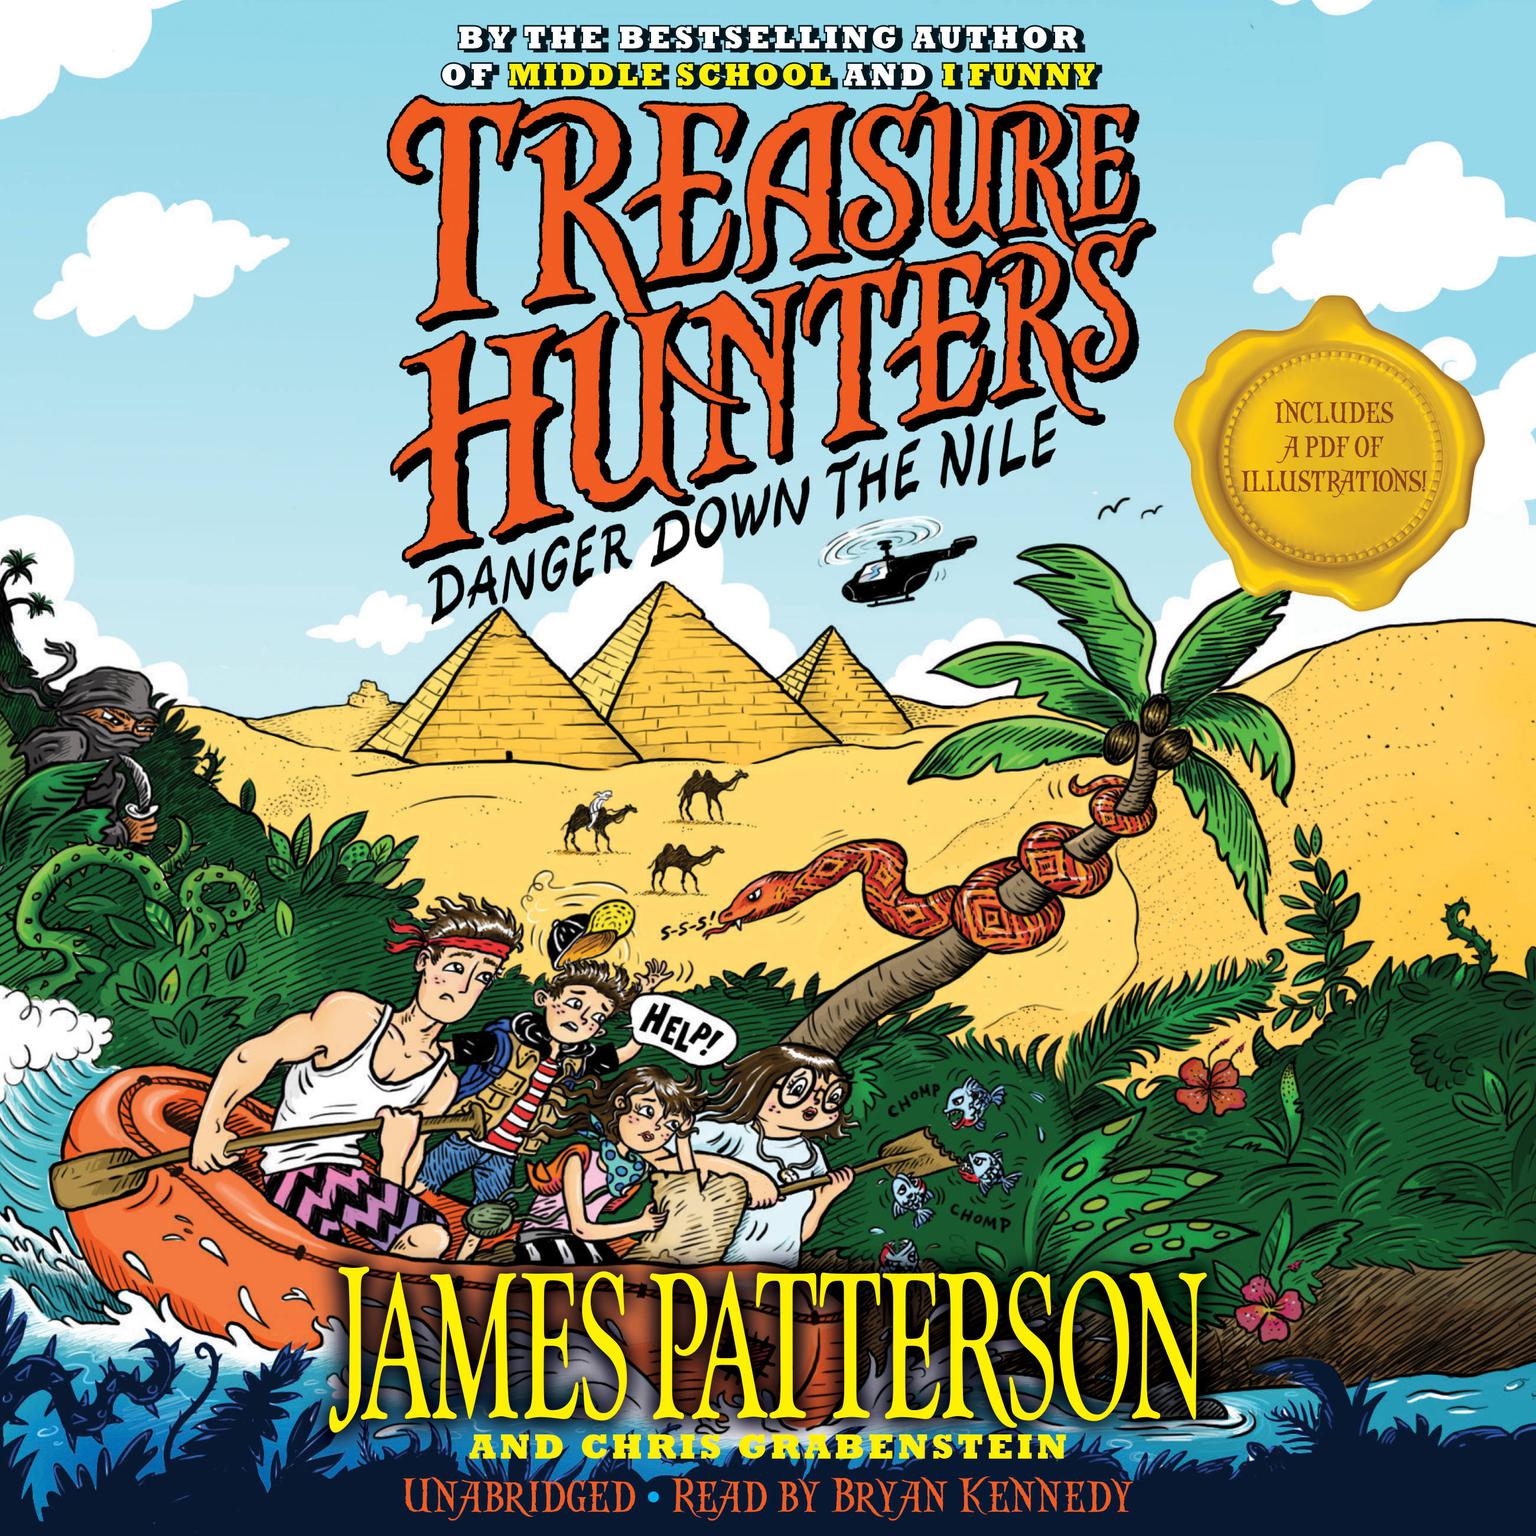 Treasure Hunters: Danger Down the Nile Audiobook, by James Patterson